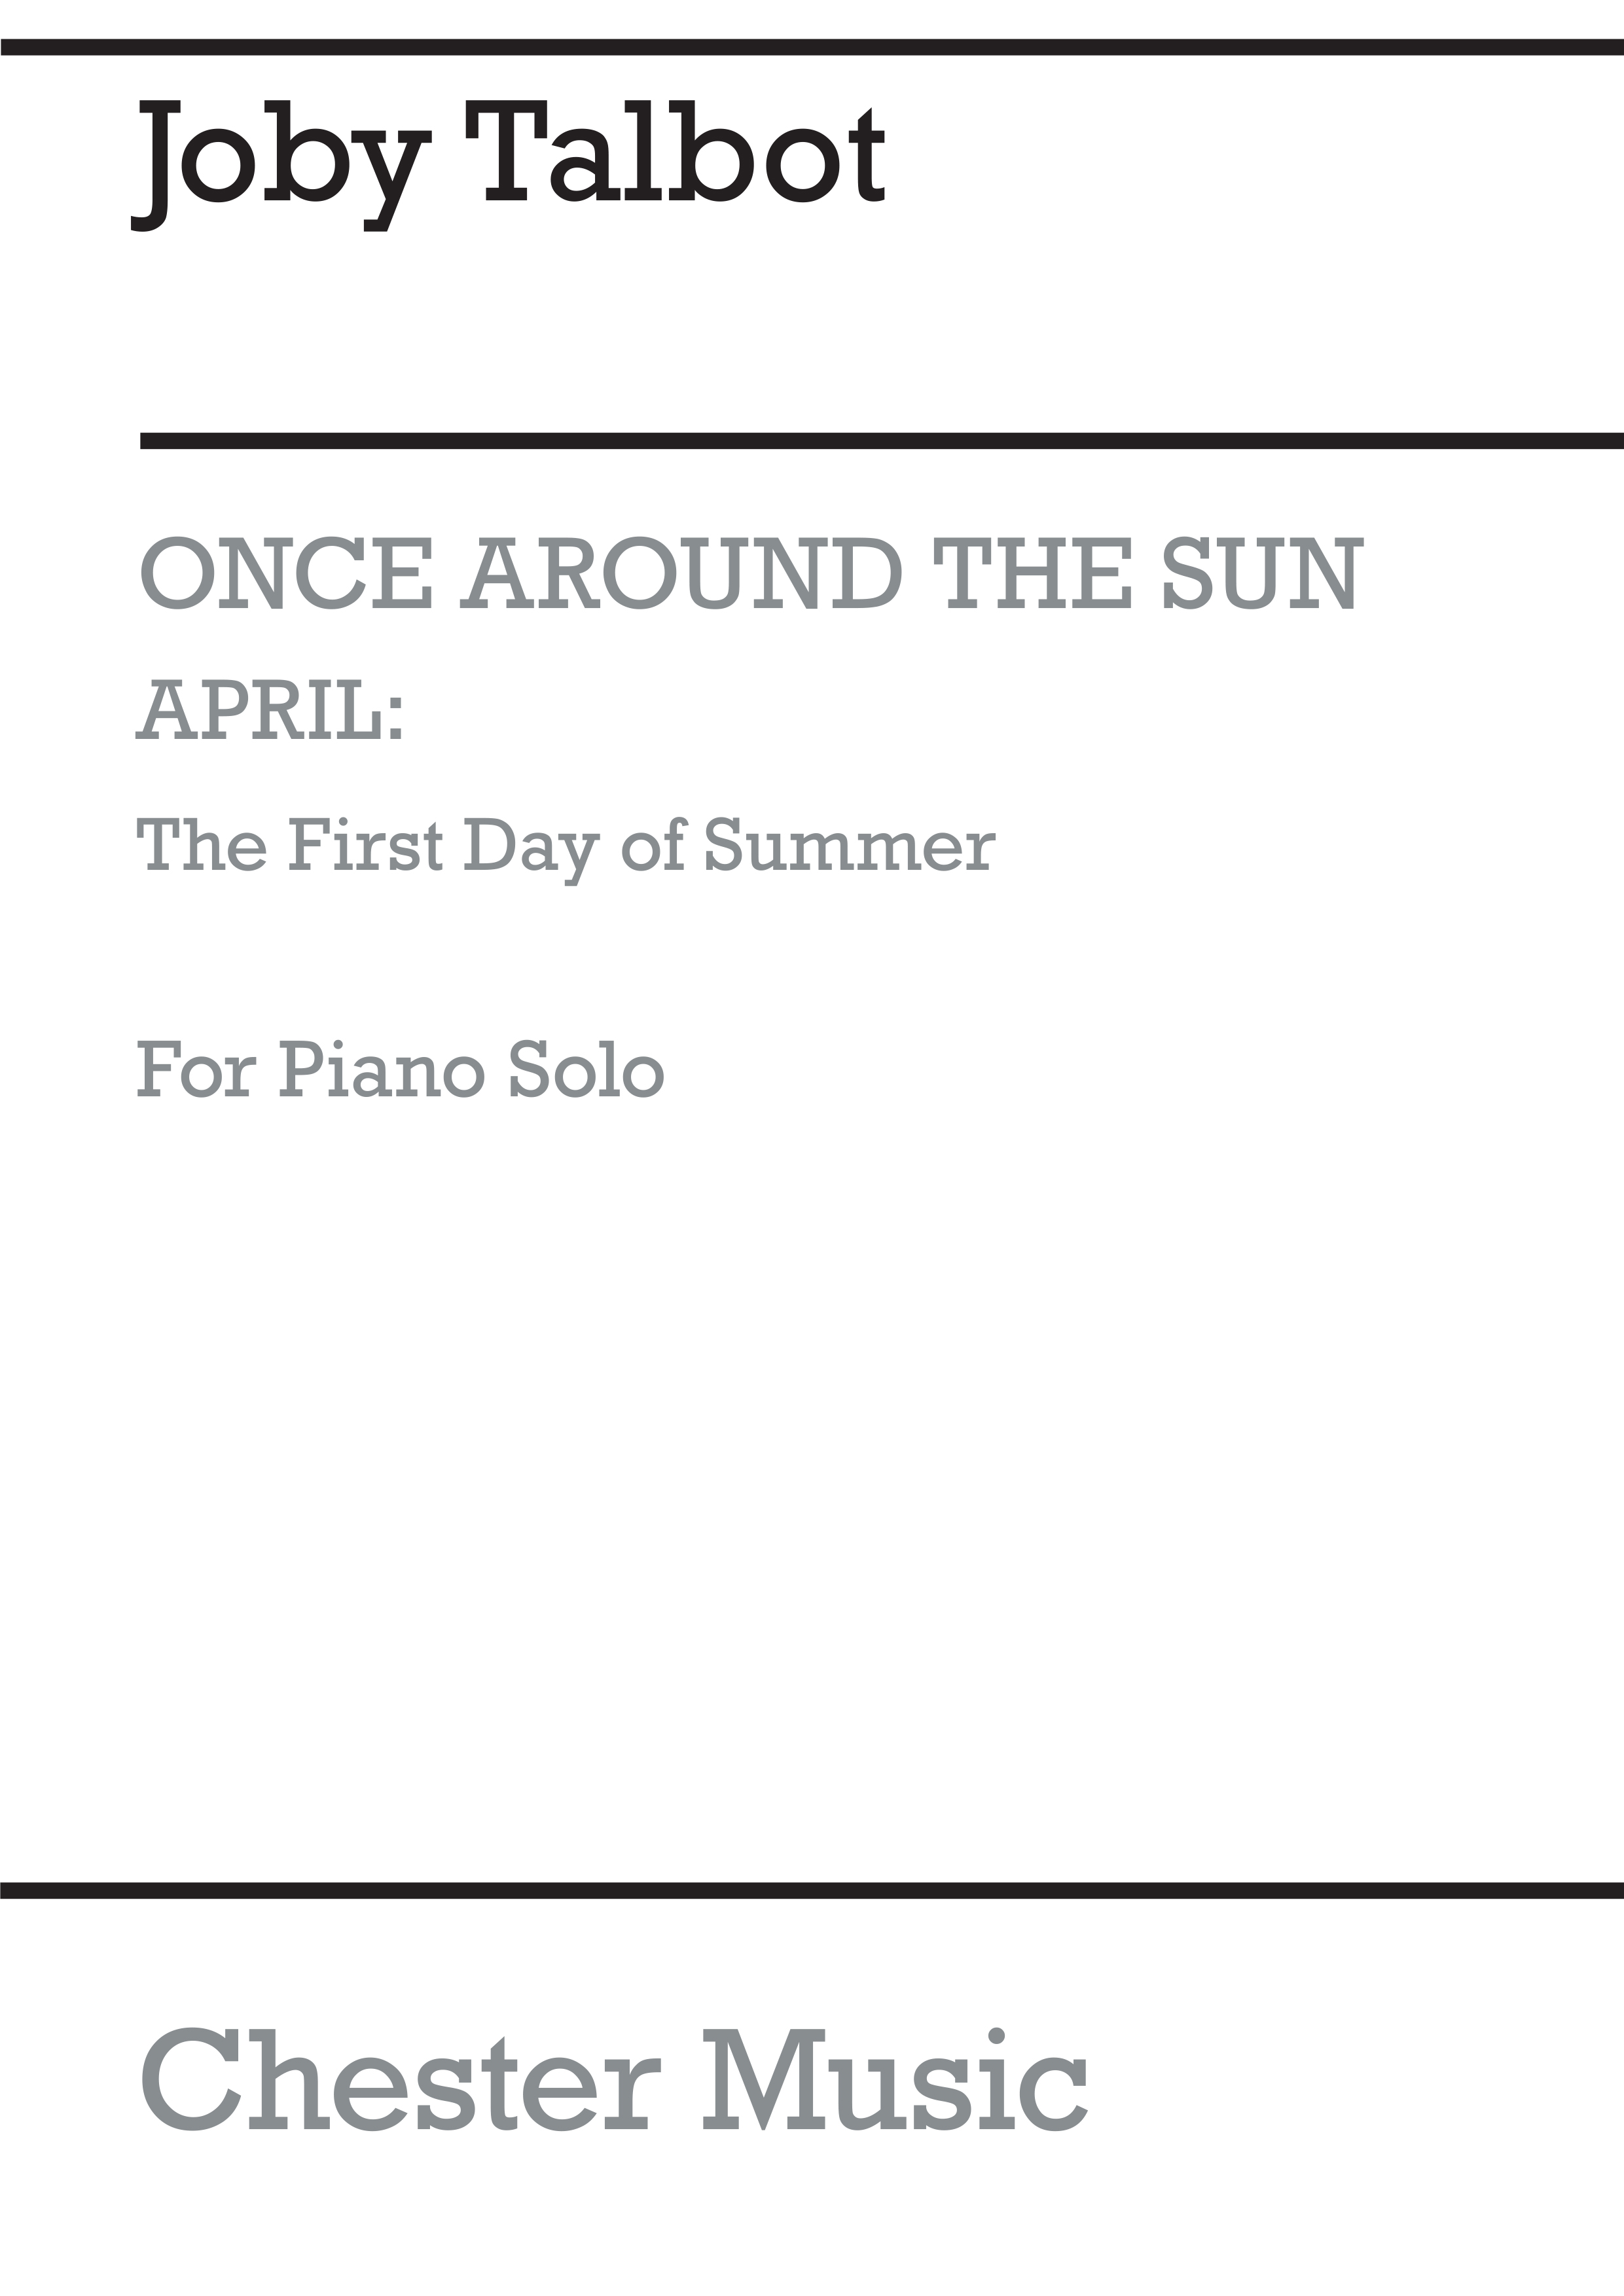 Joby Talbot: April - The First Day of Summer: Piano: Instrumental Work